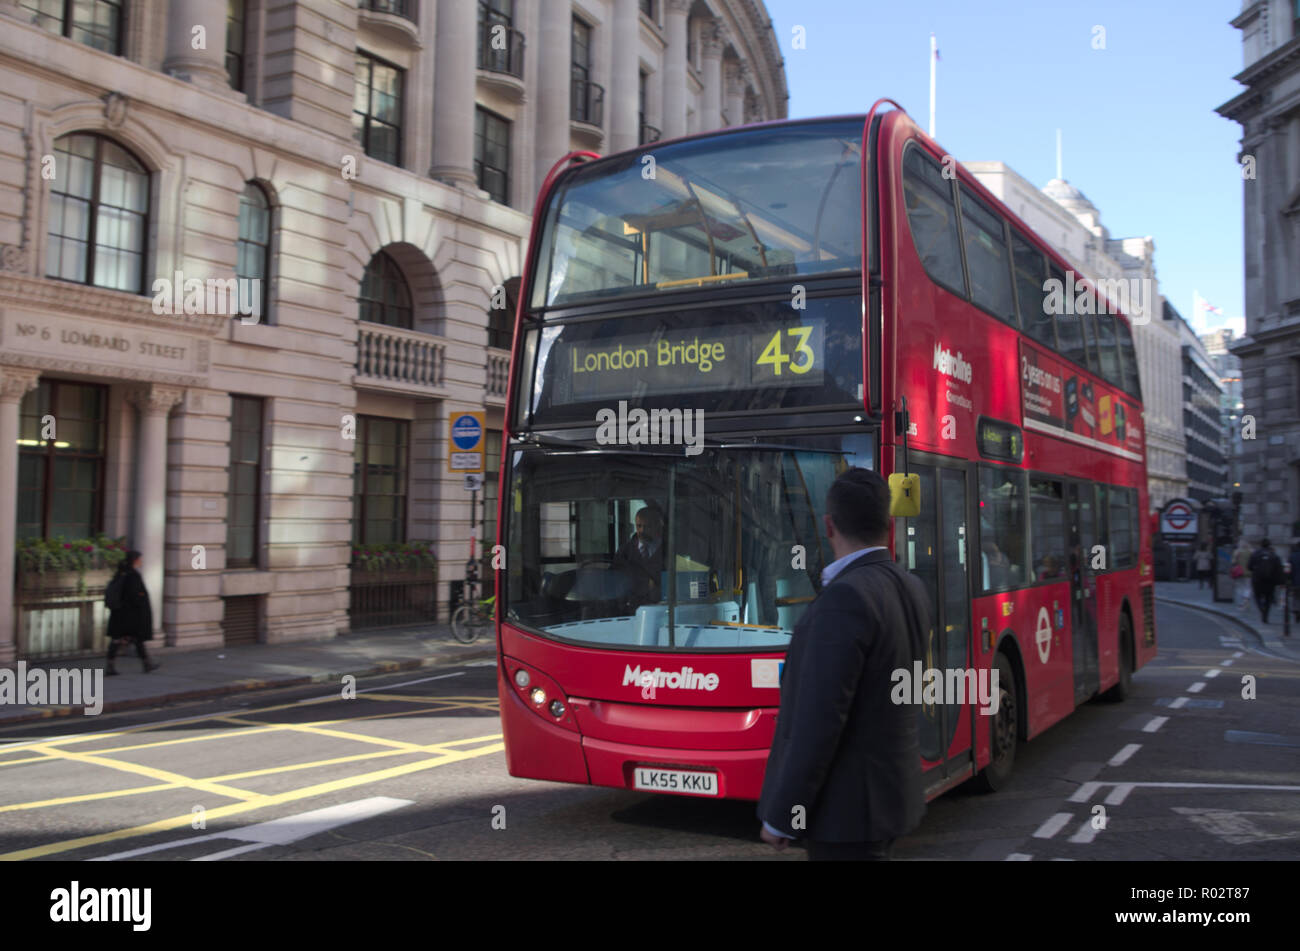 Man looking at double decker bus in London, UK. Stock Photo